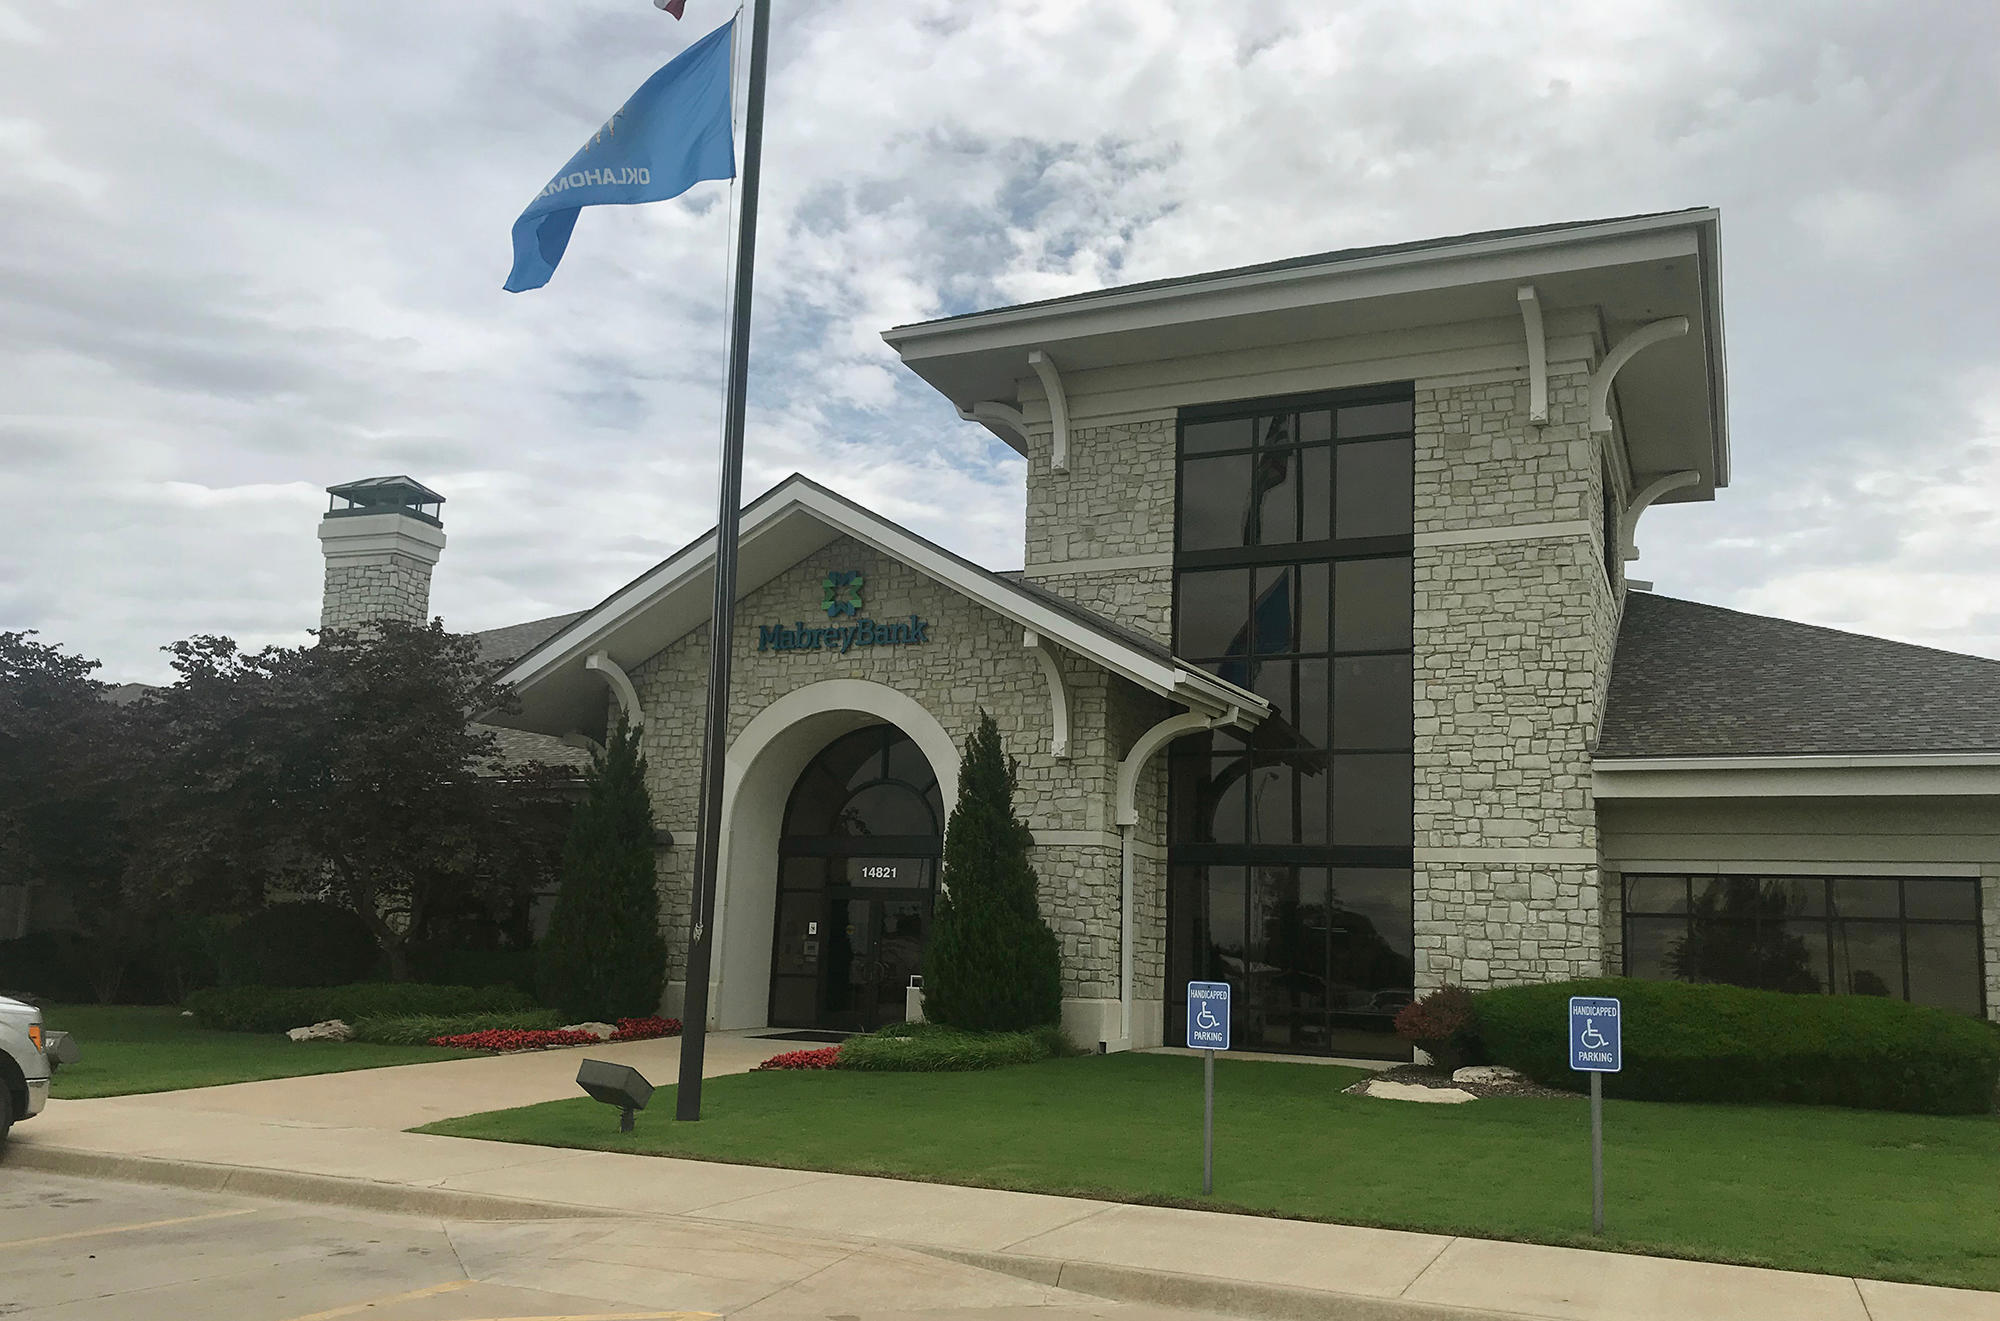 Built in 1999, Mabrey Bank's corporate headquarters is a 14,275 square foot facility and one of Bixby's largest employers.  The bank has been a part of the Bixby community since 1924 and our team members are actively involved in the local community.  Mabrey Bank's Bixby location offers a full range of financial products and services.